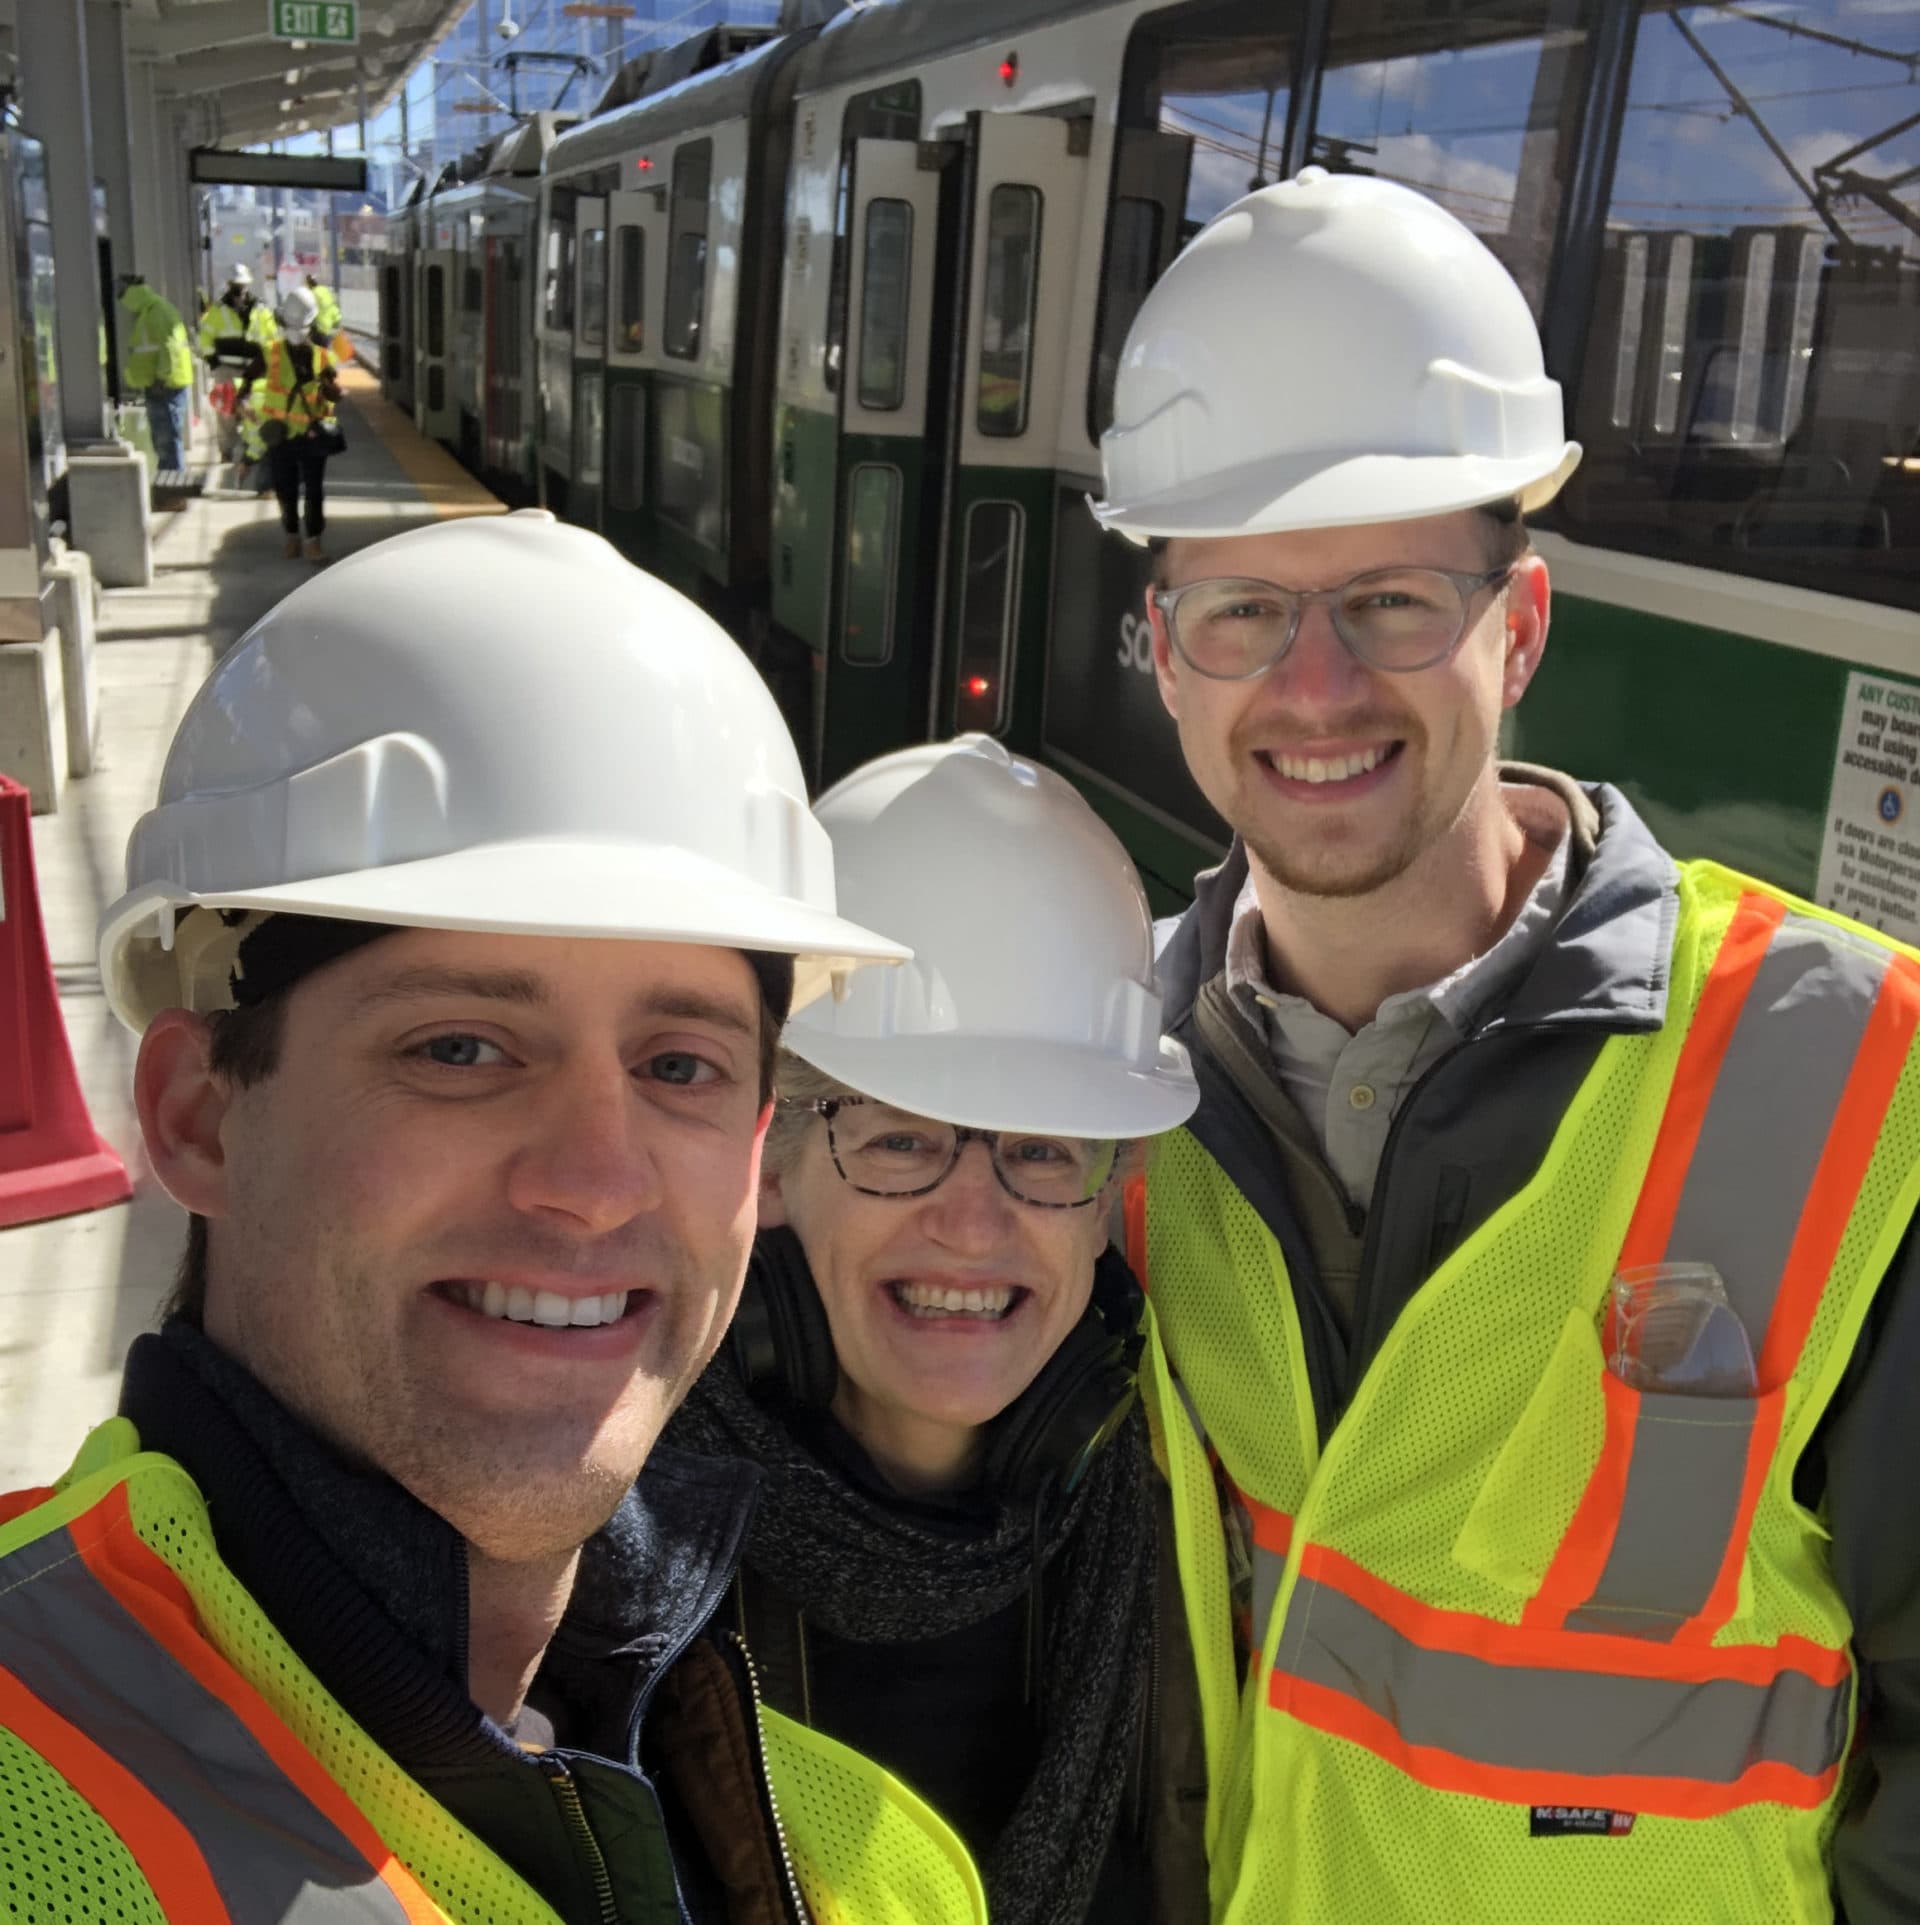 Sharon Brody and her sons Jack and Campbell during their excursion along the MBTA Green Line Extension, at the new Union Square Station in Somerville. (Sharon Brody/WBUR)